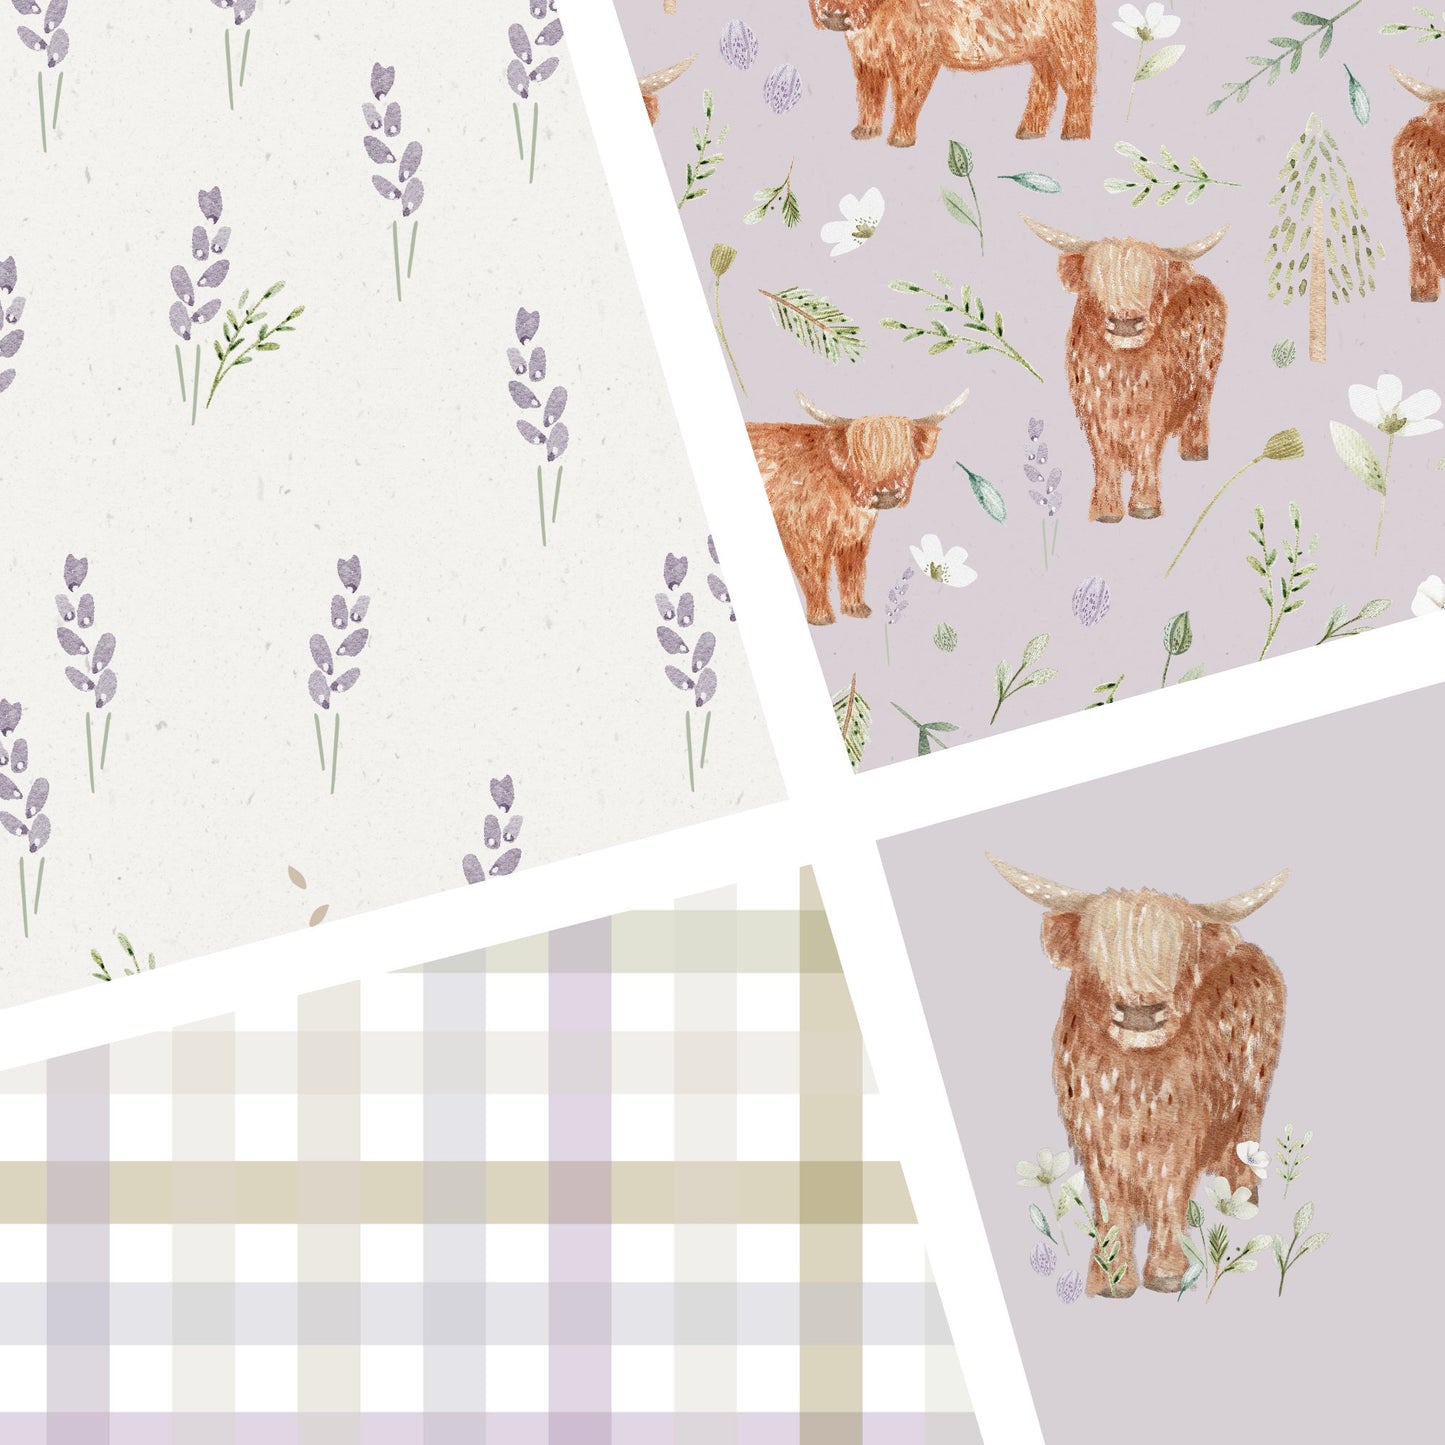 Lumelo and Ginger -Thistle - HIghland Cow - on Dusty Lavender - Little Rhody Sewing Co.